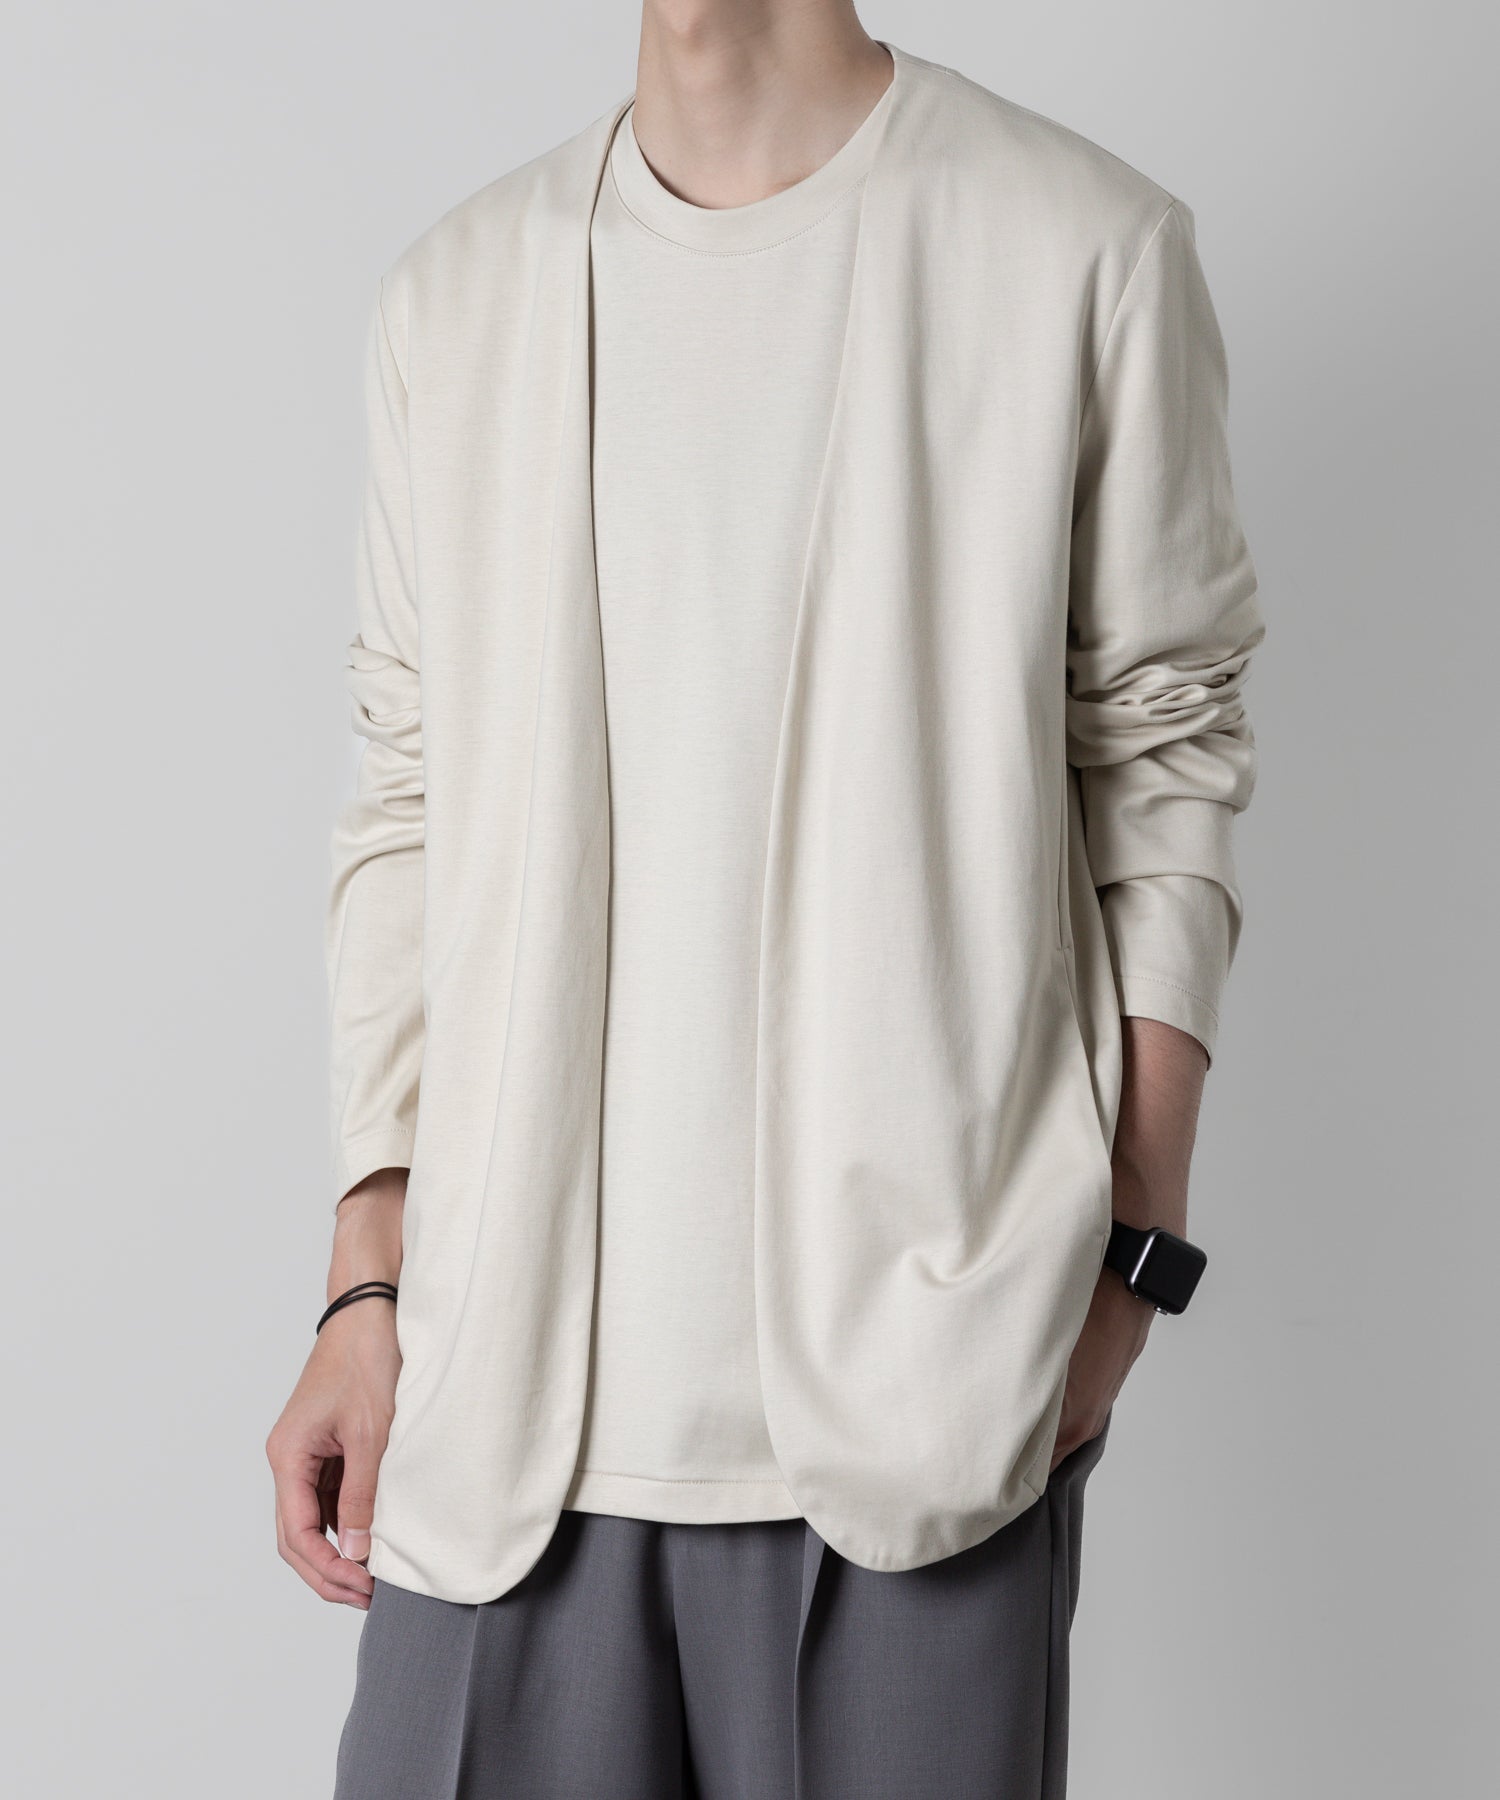 【ATTACHMENT】ATTACHMENT アタッチメントのCOTTON DOUBLE FACE COLLARLESS CARDIGAN - OFF WHITE 公式通販サイトsession福岡セレクトショップ